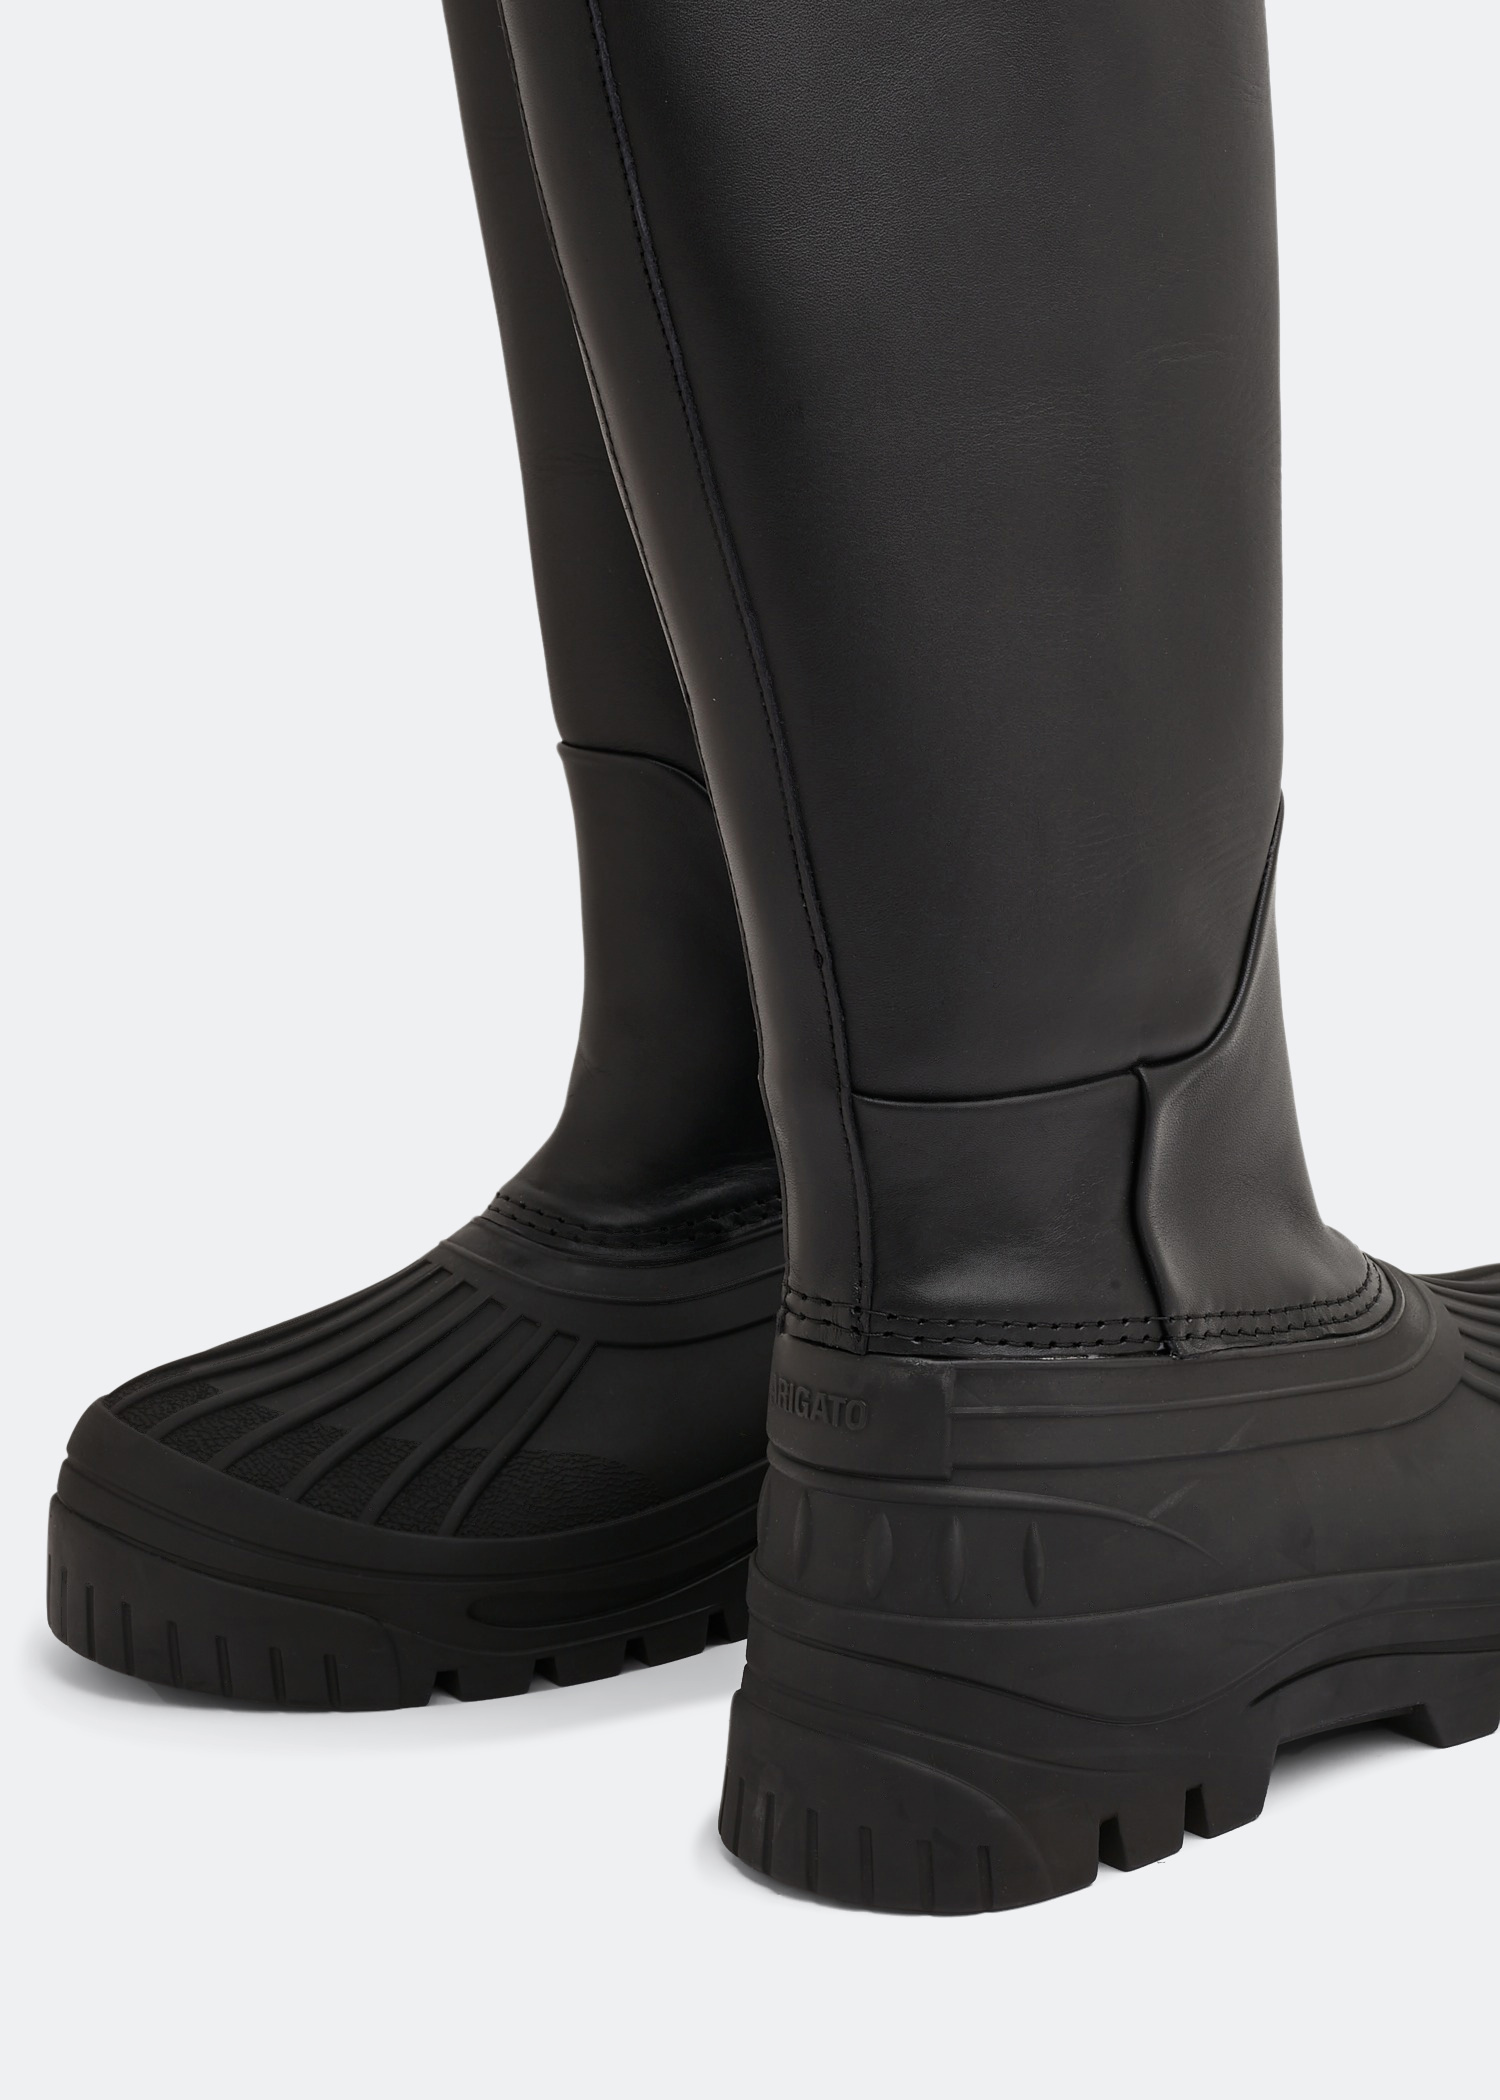 Axel Arigato Cryo high boots for Women - Black in KSA | Level Shoes